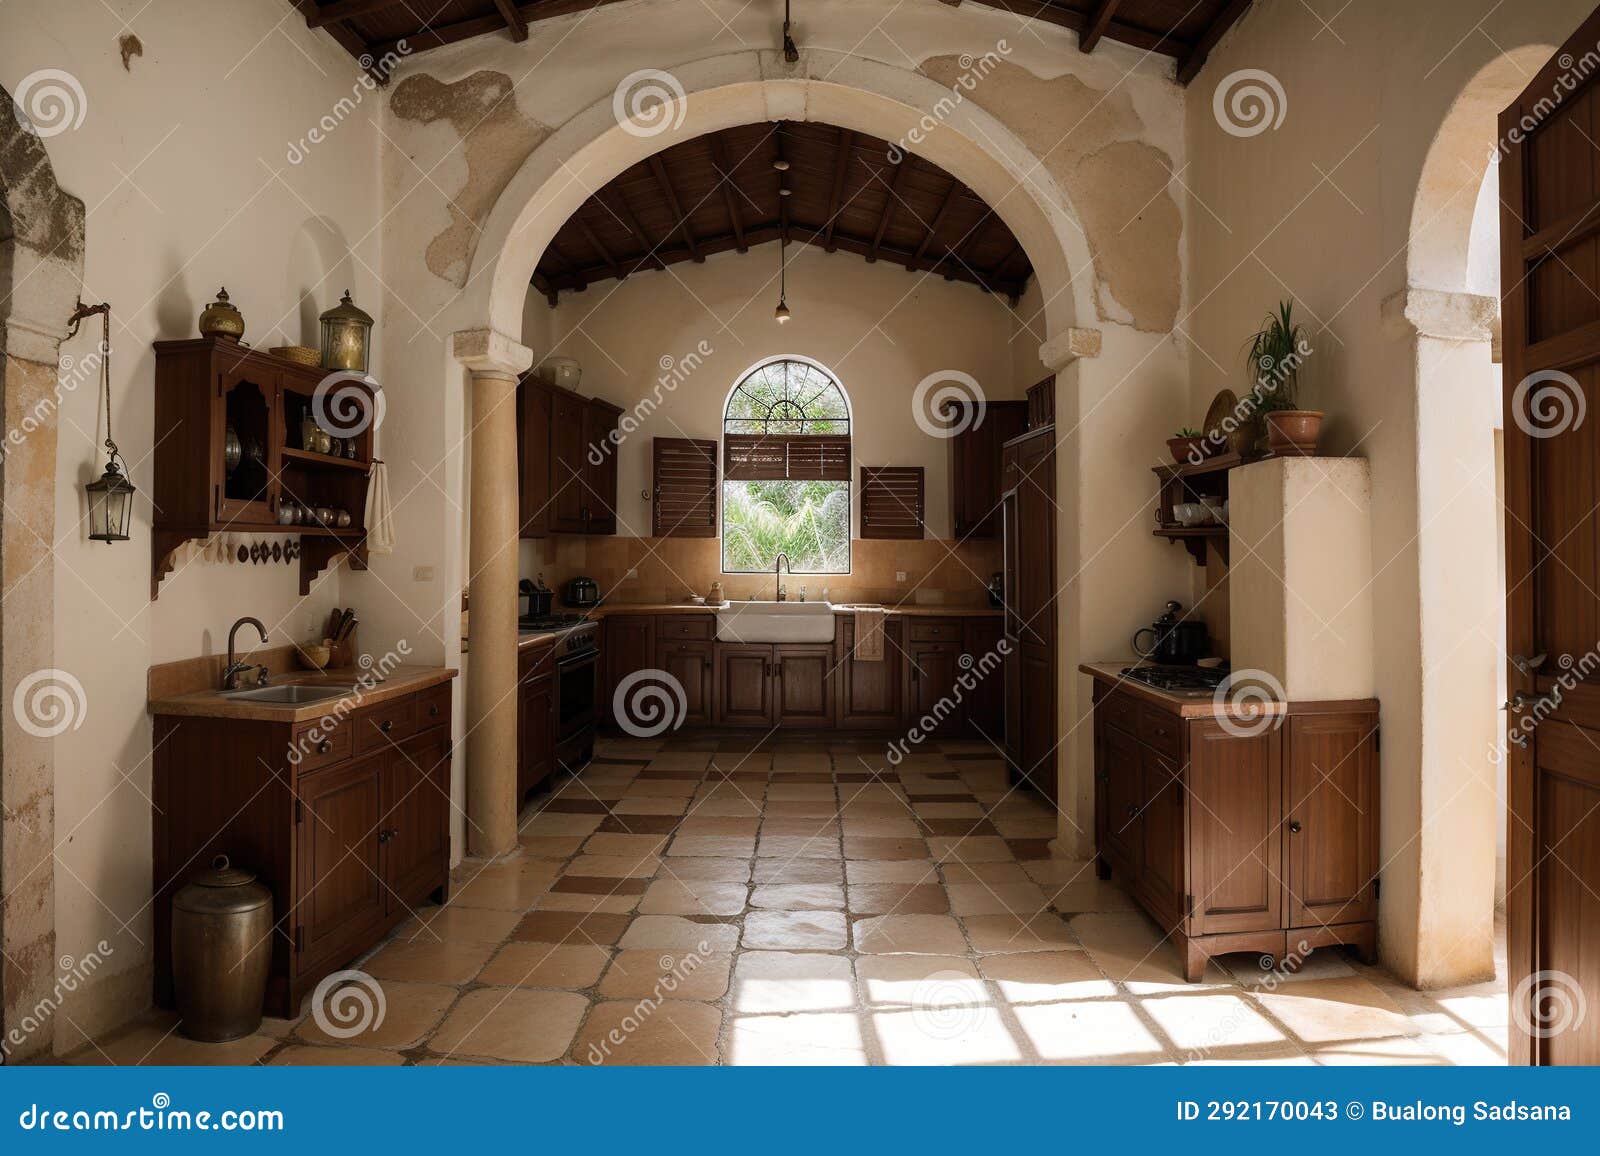 trinidad, cuba - october 2019 : interior of a colonial style kitchen inside the heritage home of palacio brunet or museo romantico